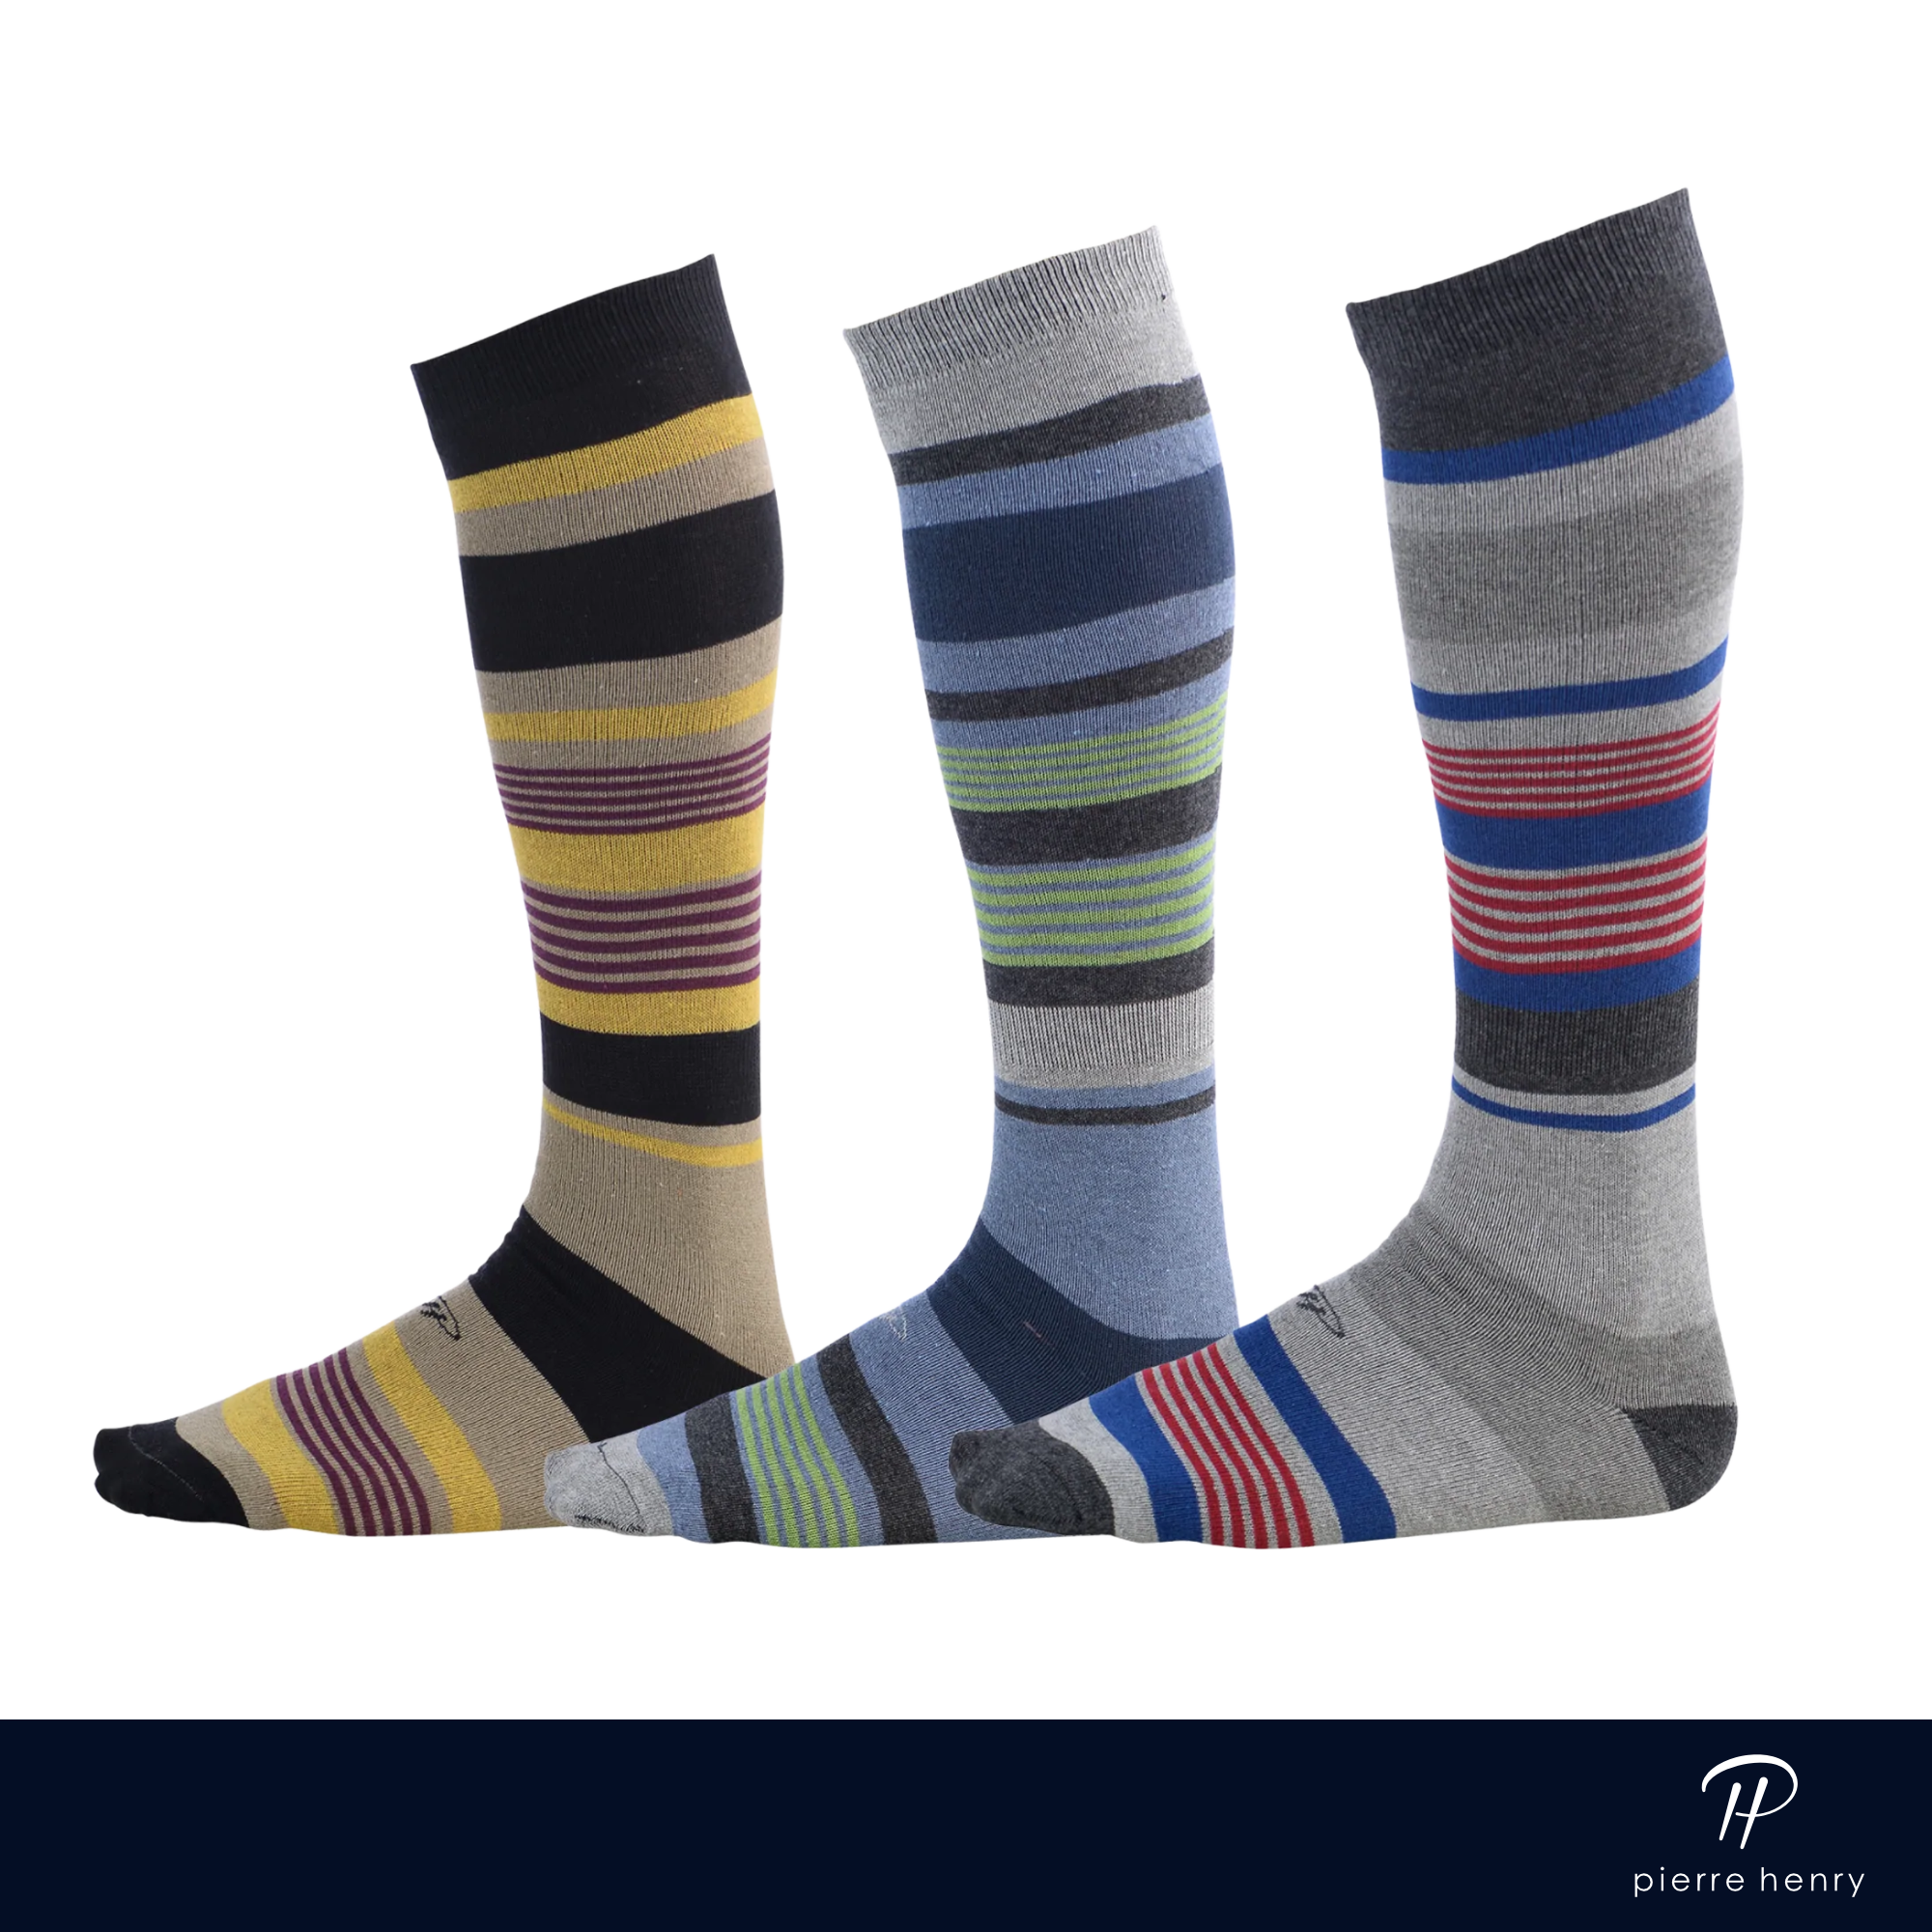 beige dress socks with colored stripes, royal blue dress socks with colored stripes, grey dress socks with colored stripes